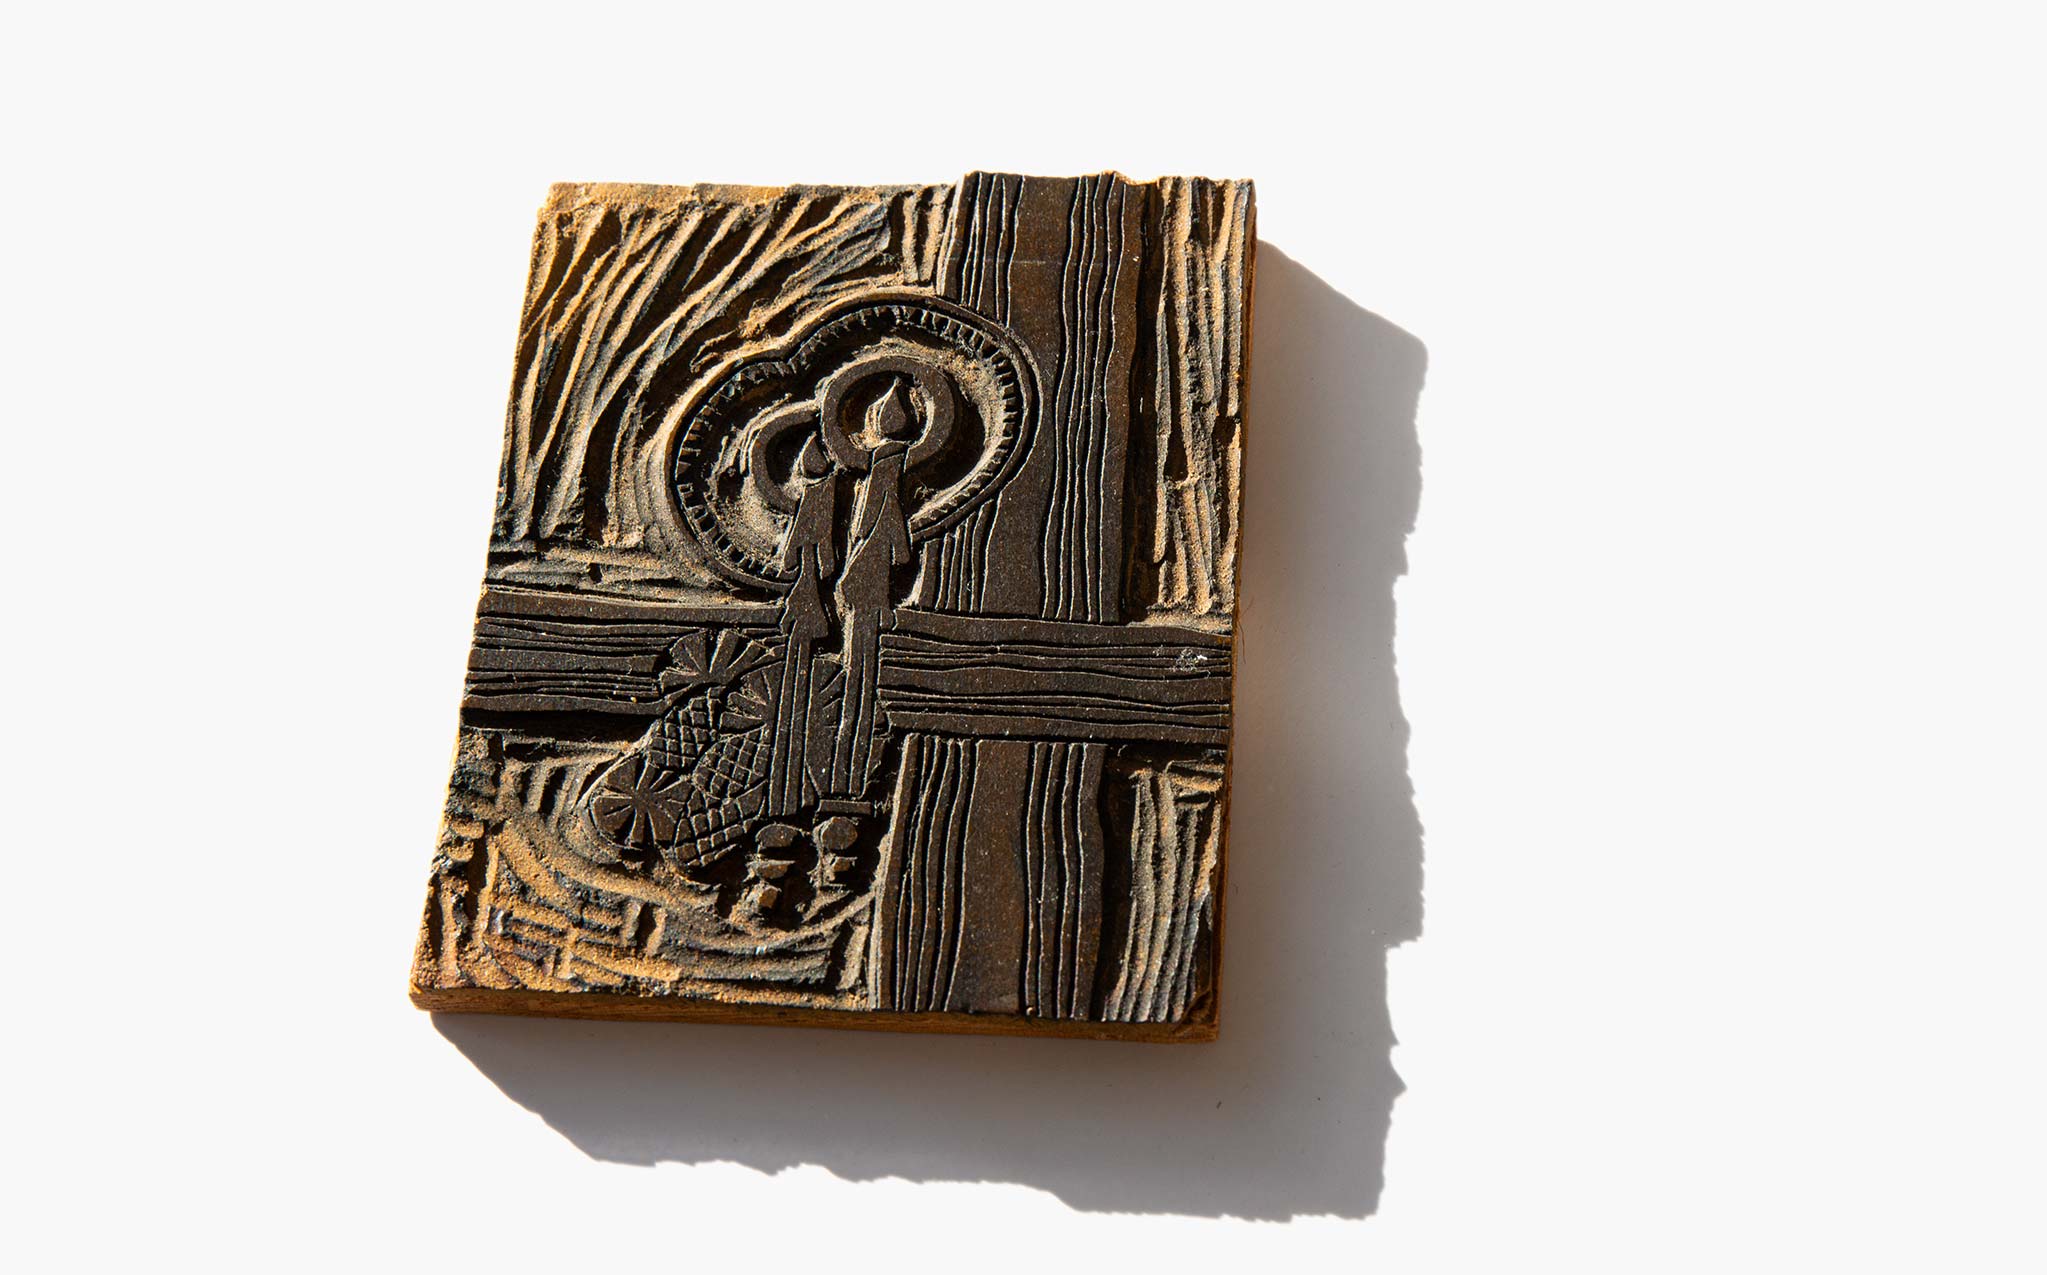 Candlelight Wooden Printing Block